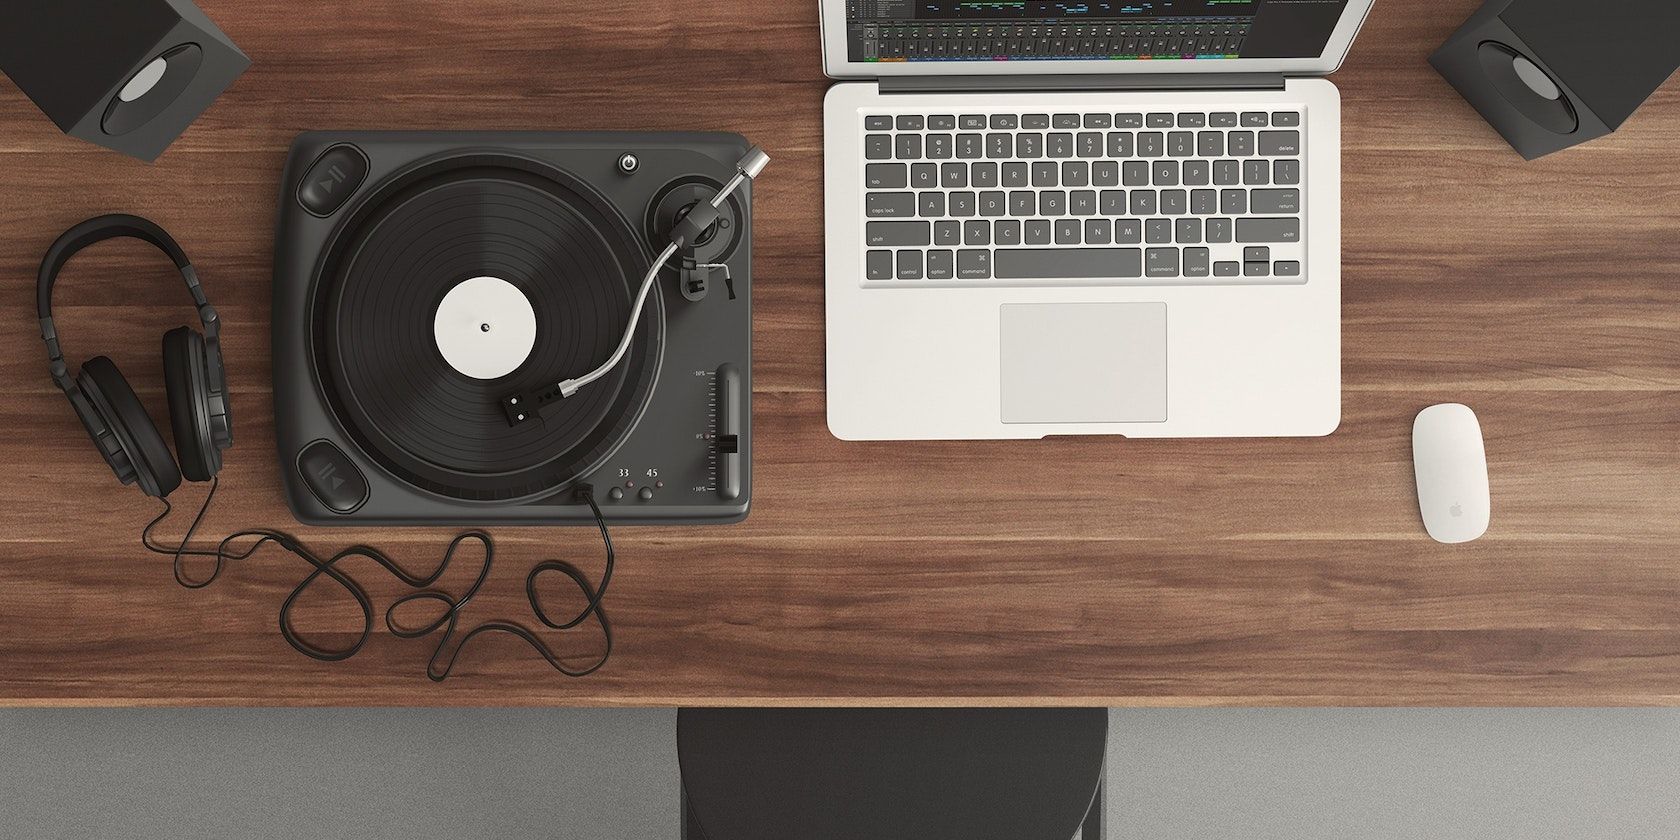 MacBook on a table with a record player, speakers, and headphones